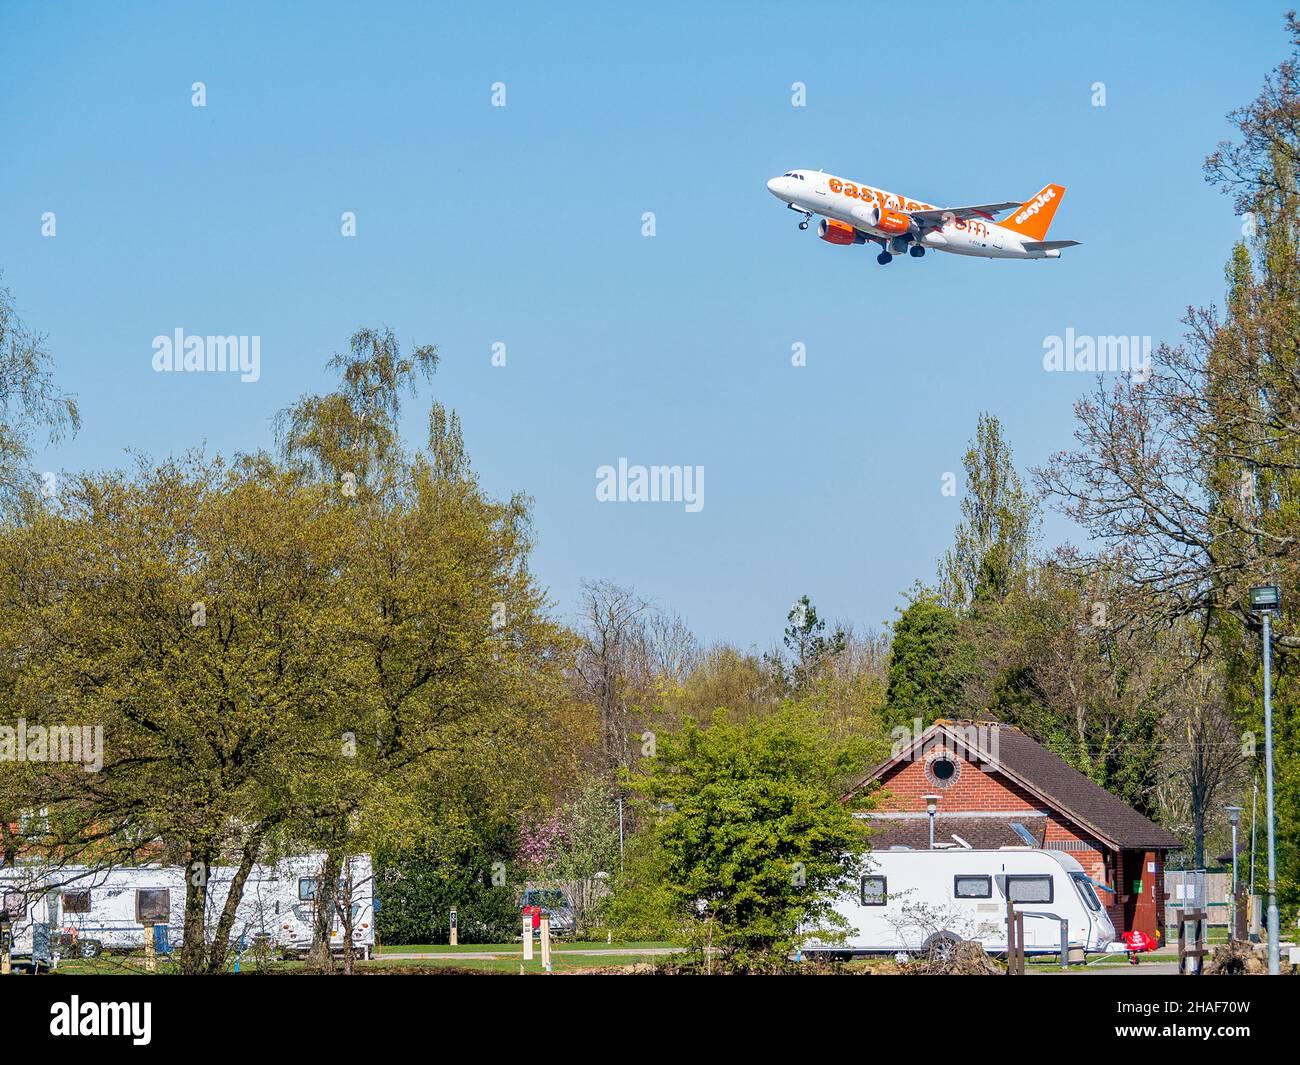 An Easyjet aircraft taking off from Gatwick Airport and flying over Gatwick caravan park. Stock Photo